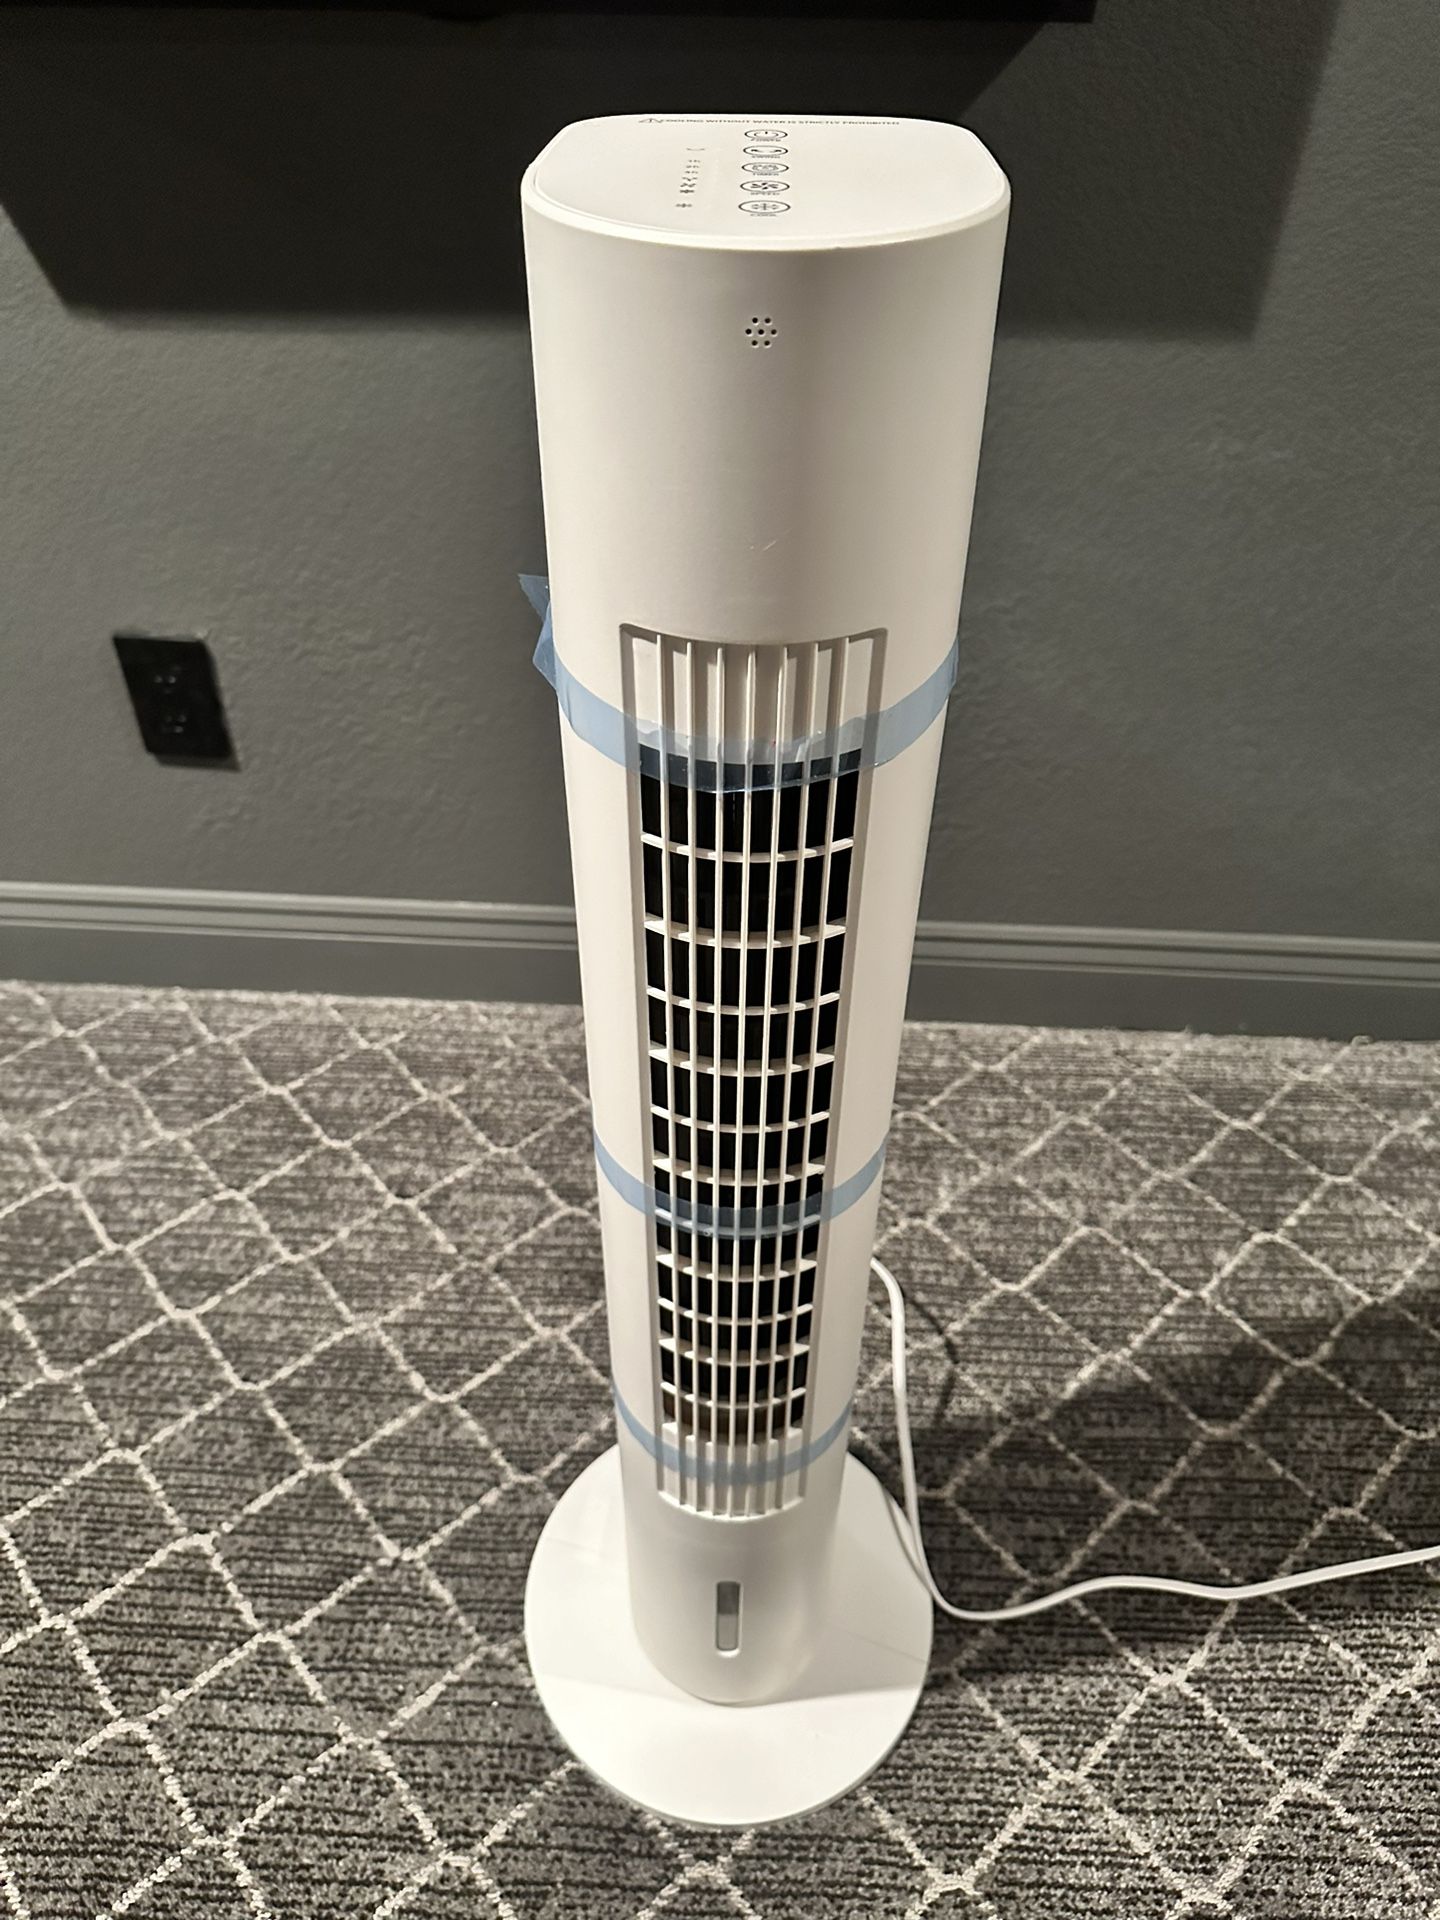 Evaporative Air Cooler, Oscillating Tower Fan, swamp cooler with ice packs